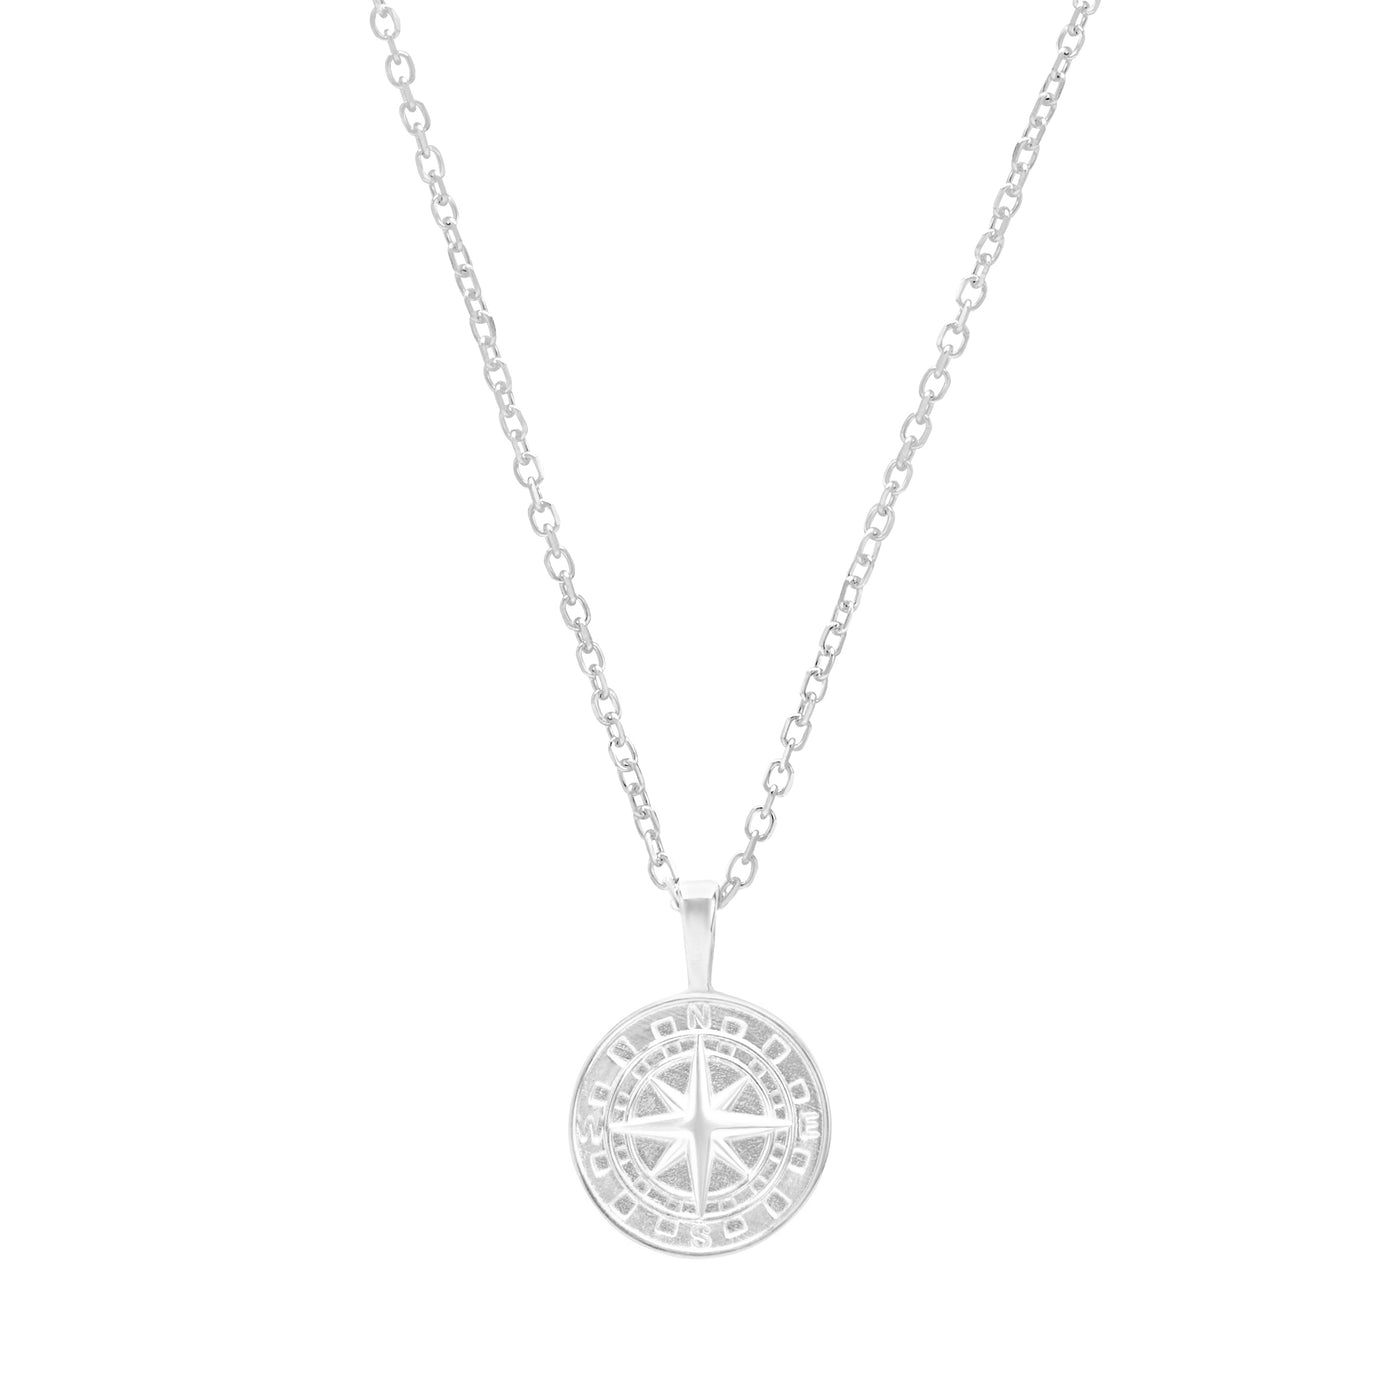 Compass pendant white gold on cable chain on white background